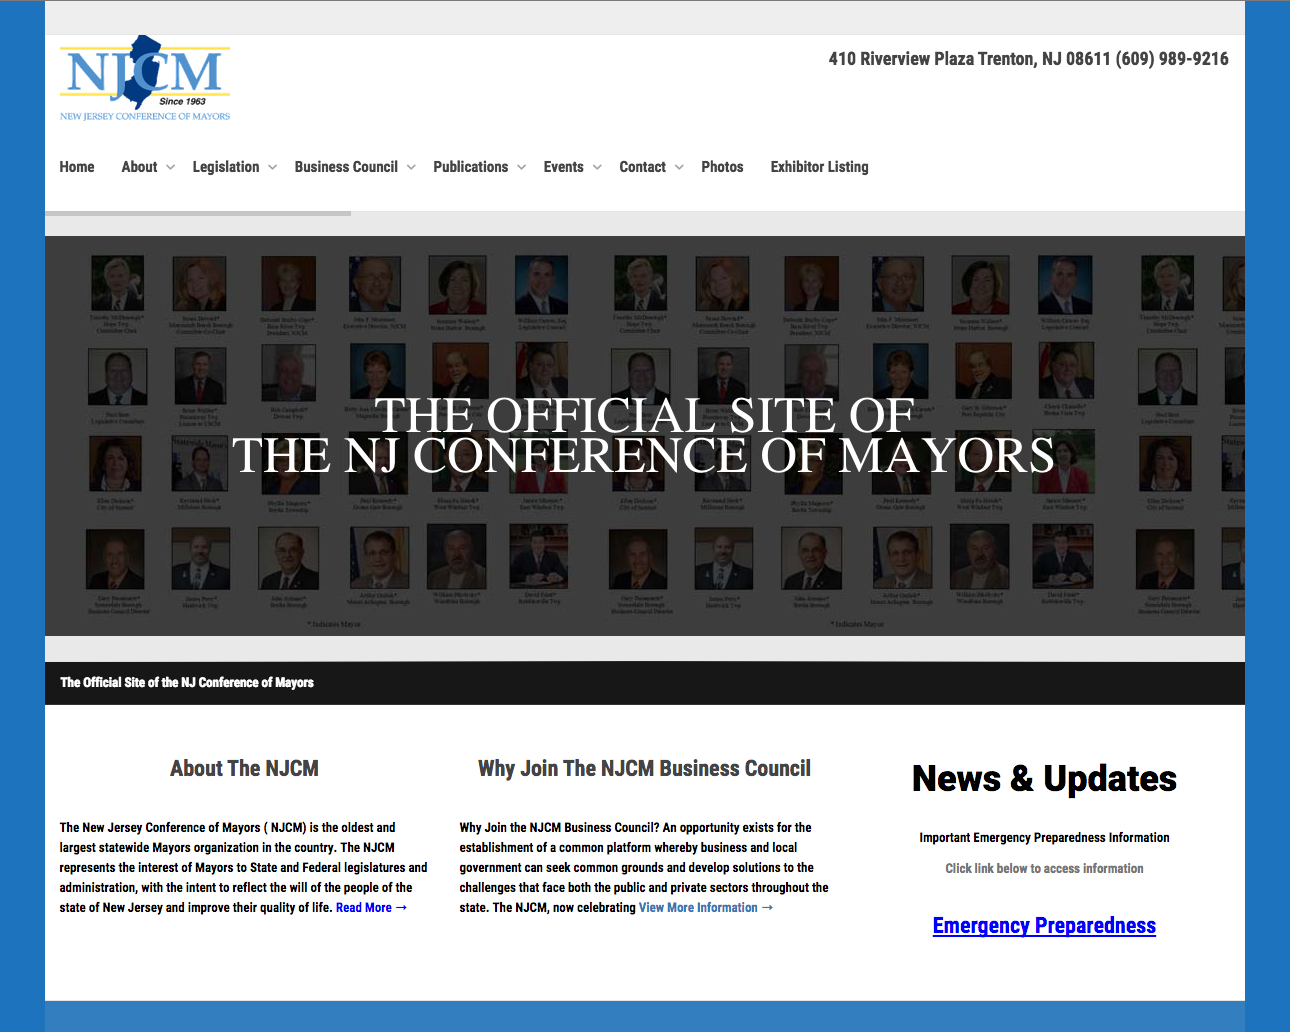 NJ Conference of Mayors